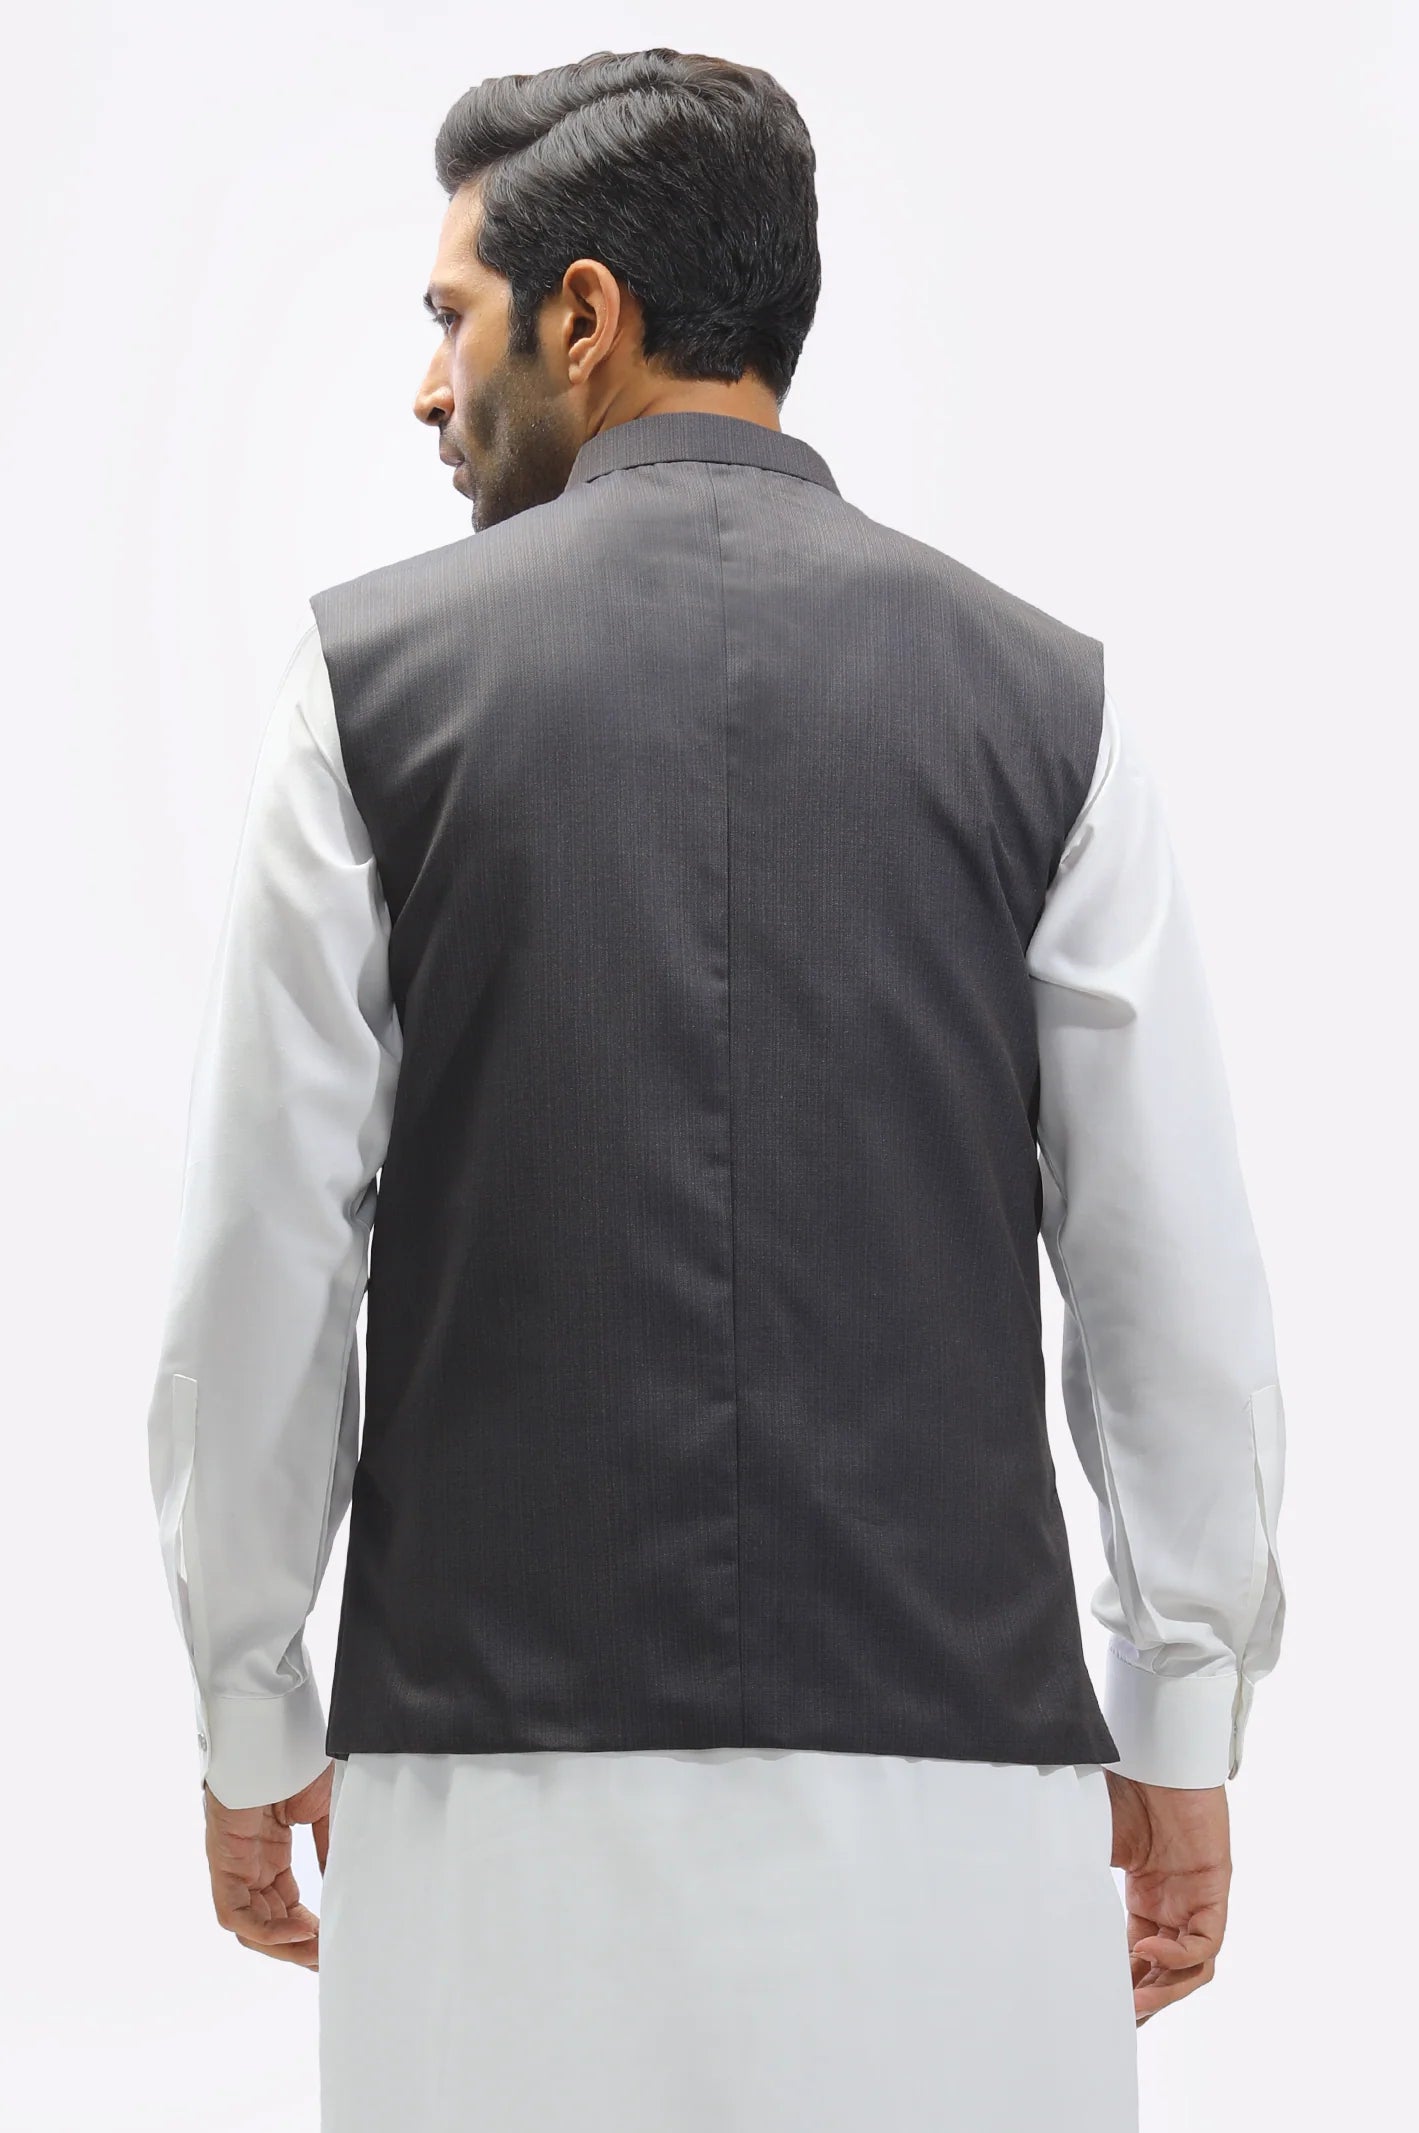 Light Brown Waistcoat From Diners